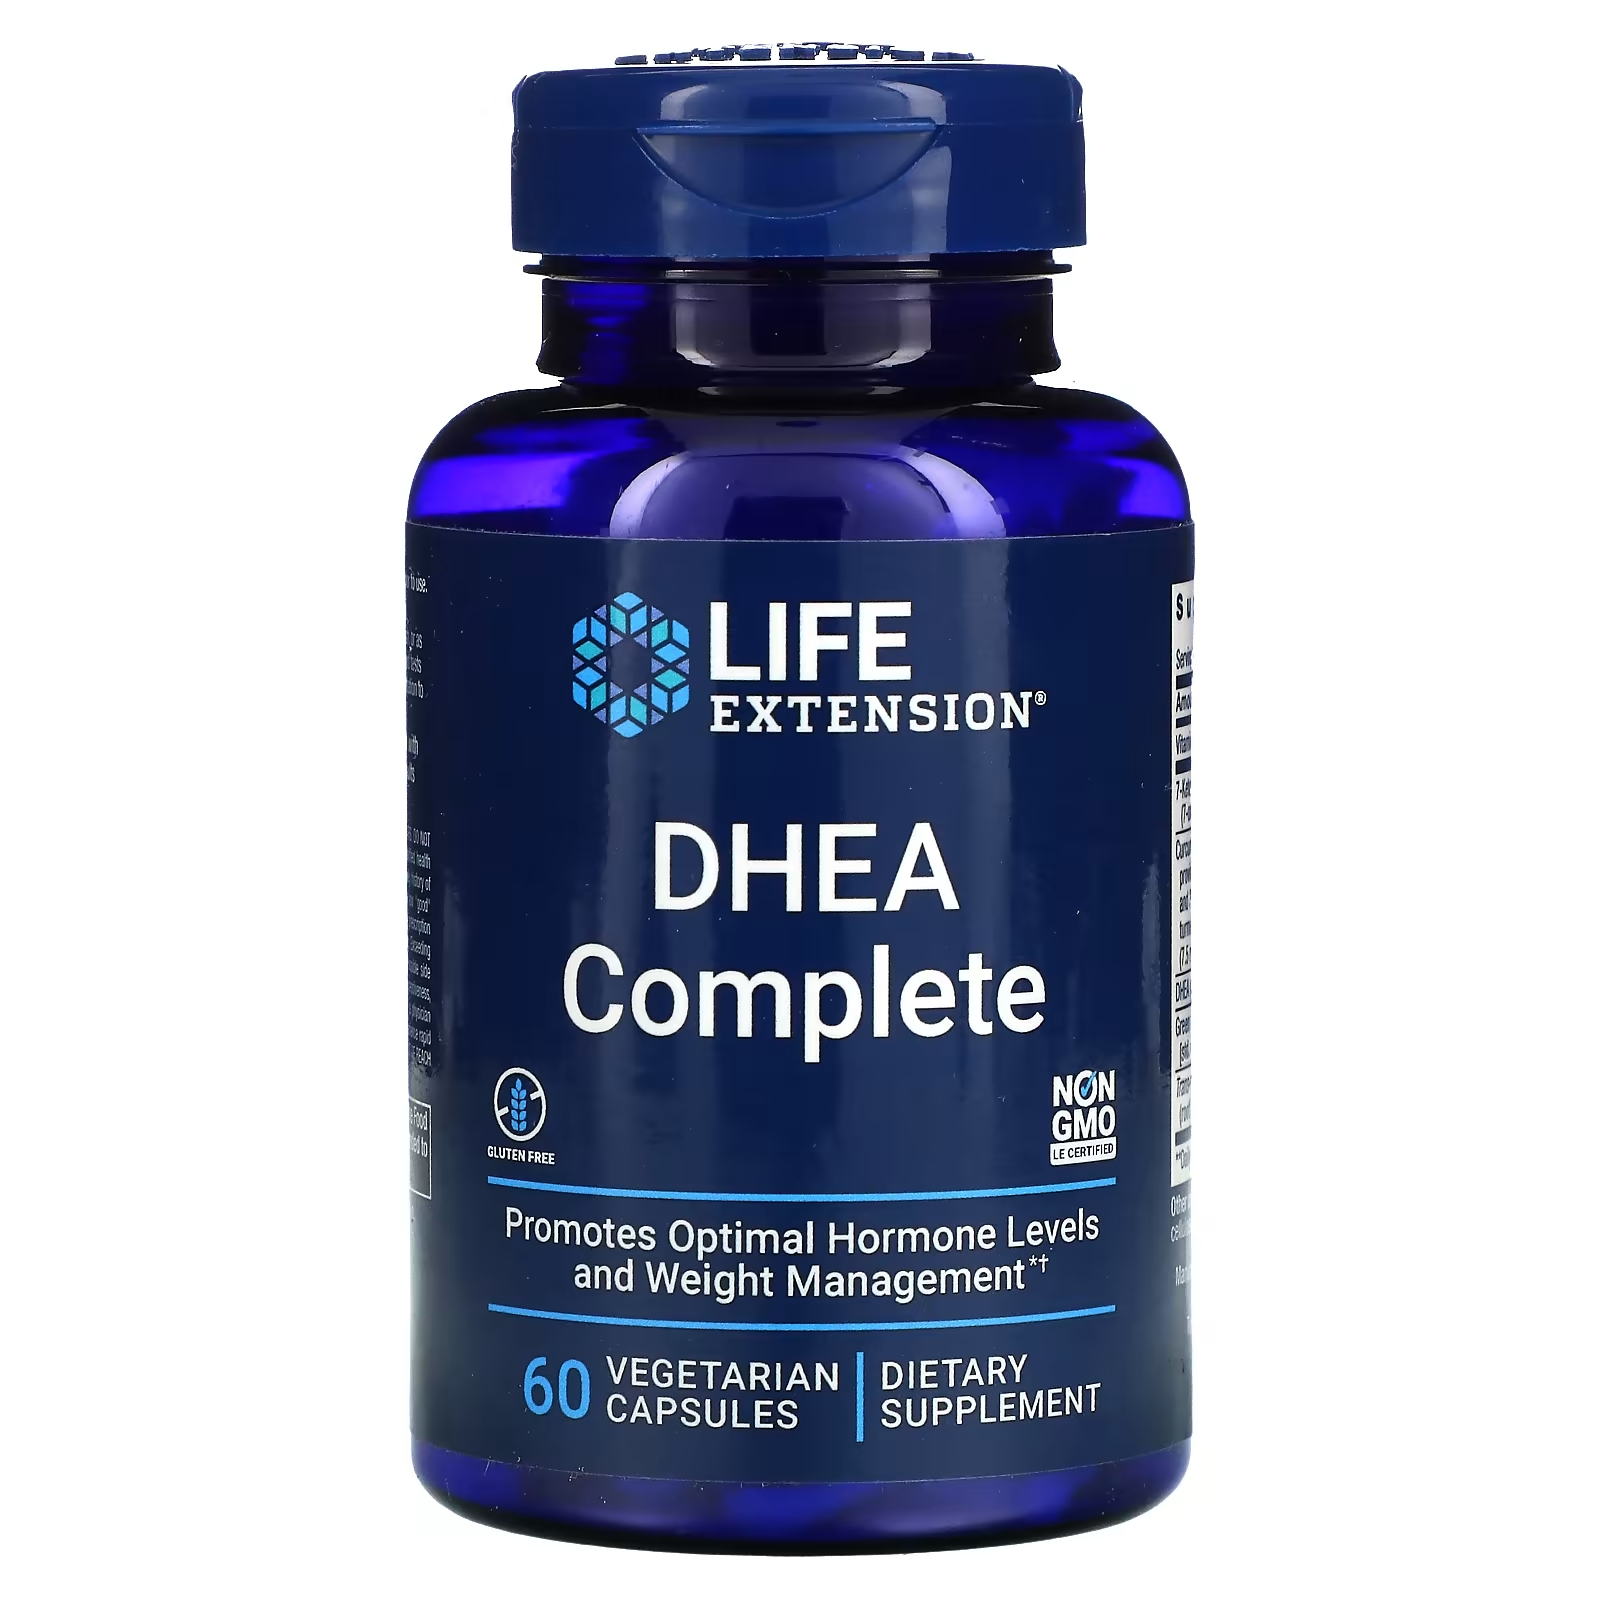 Life Extension DHEA Complete, 60 вегетарианских капсул life extension ультраэкстракт сои 60 вегетарианских капсул